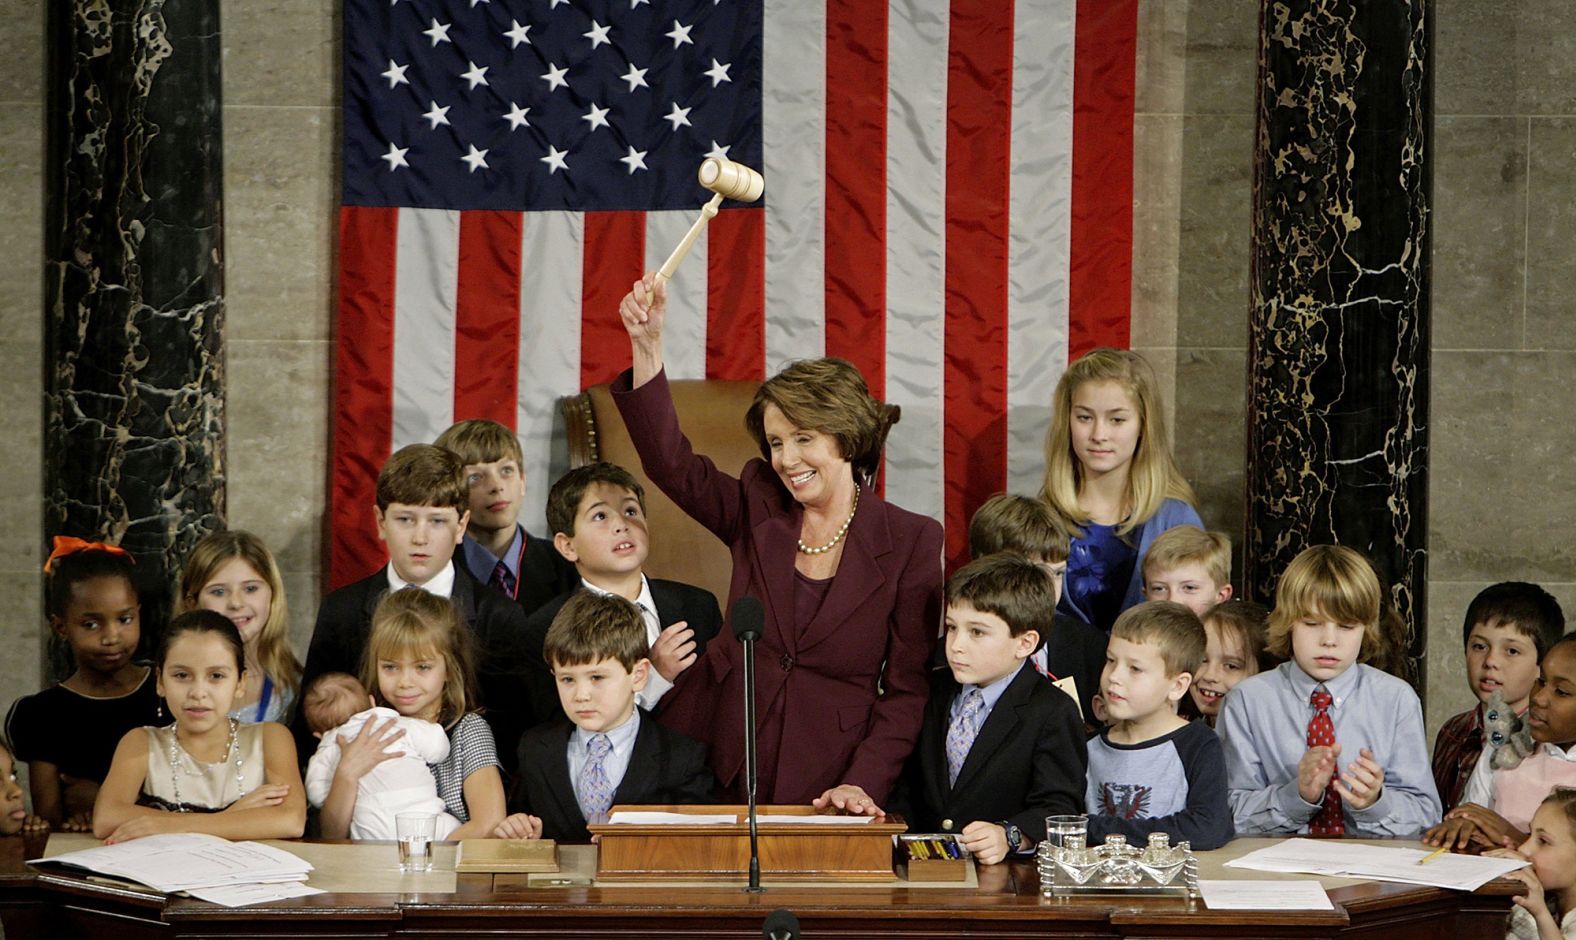 Nancy Pelosi is surrounded by her grandchildren and the children of other Congress members after being elected as the first female Speaker of the House in 2007. She made history again in 2019 when she returned to serve as House Speaker for a third term. 